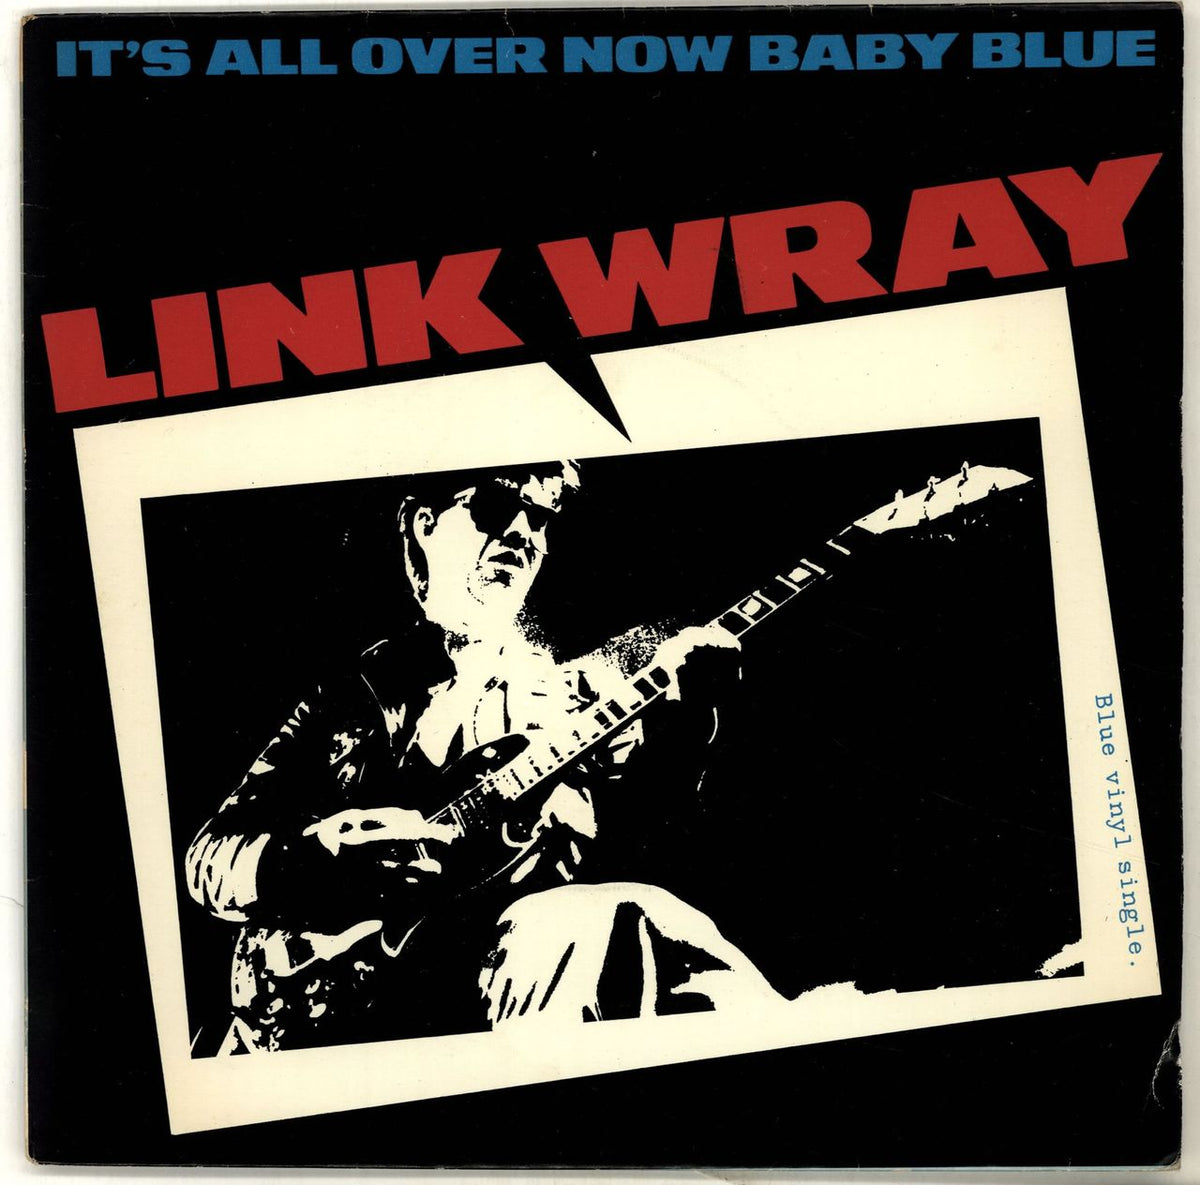 Link Wray It's All Over Now Baby Blue - Blue Vinyl UK 7